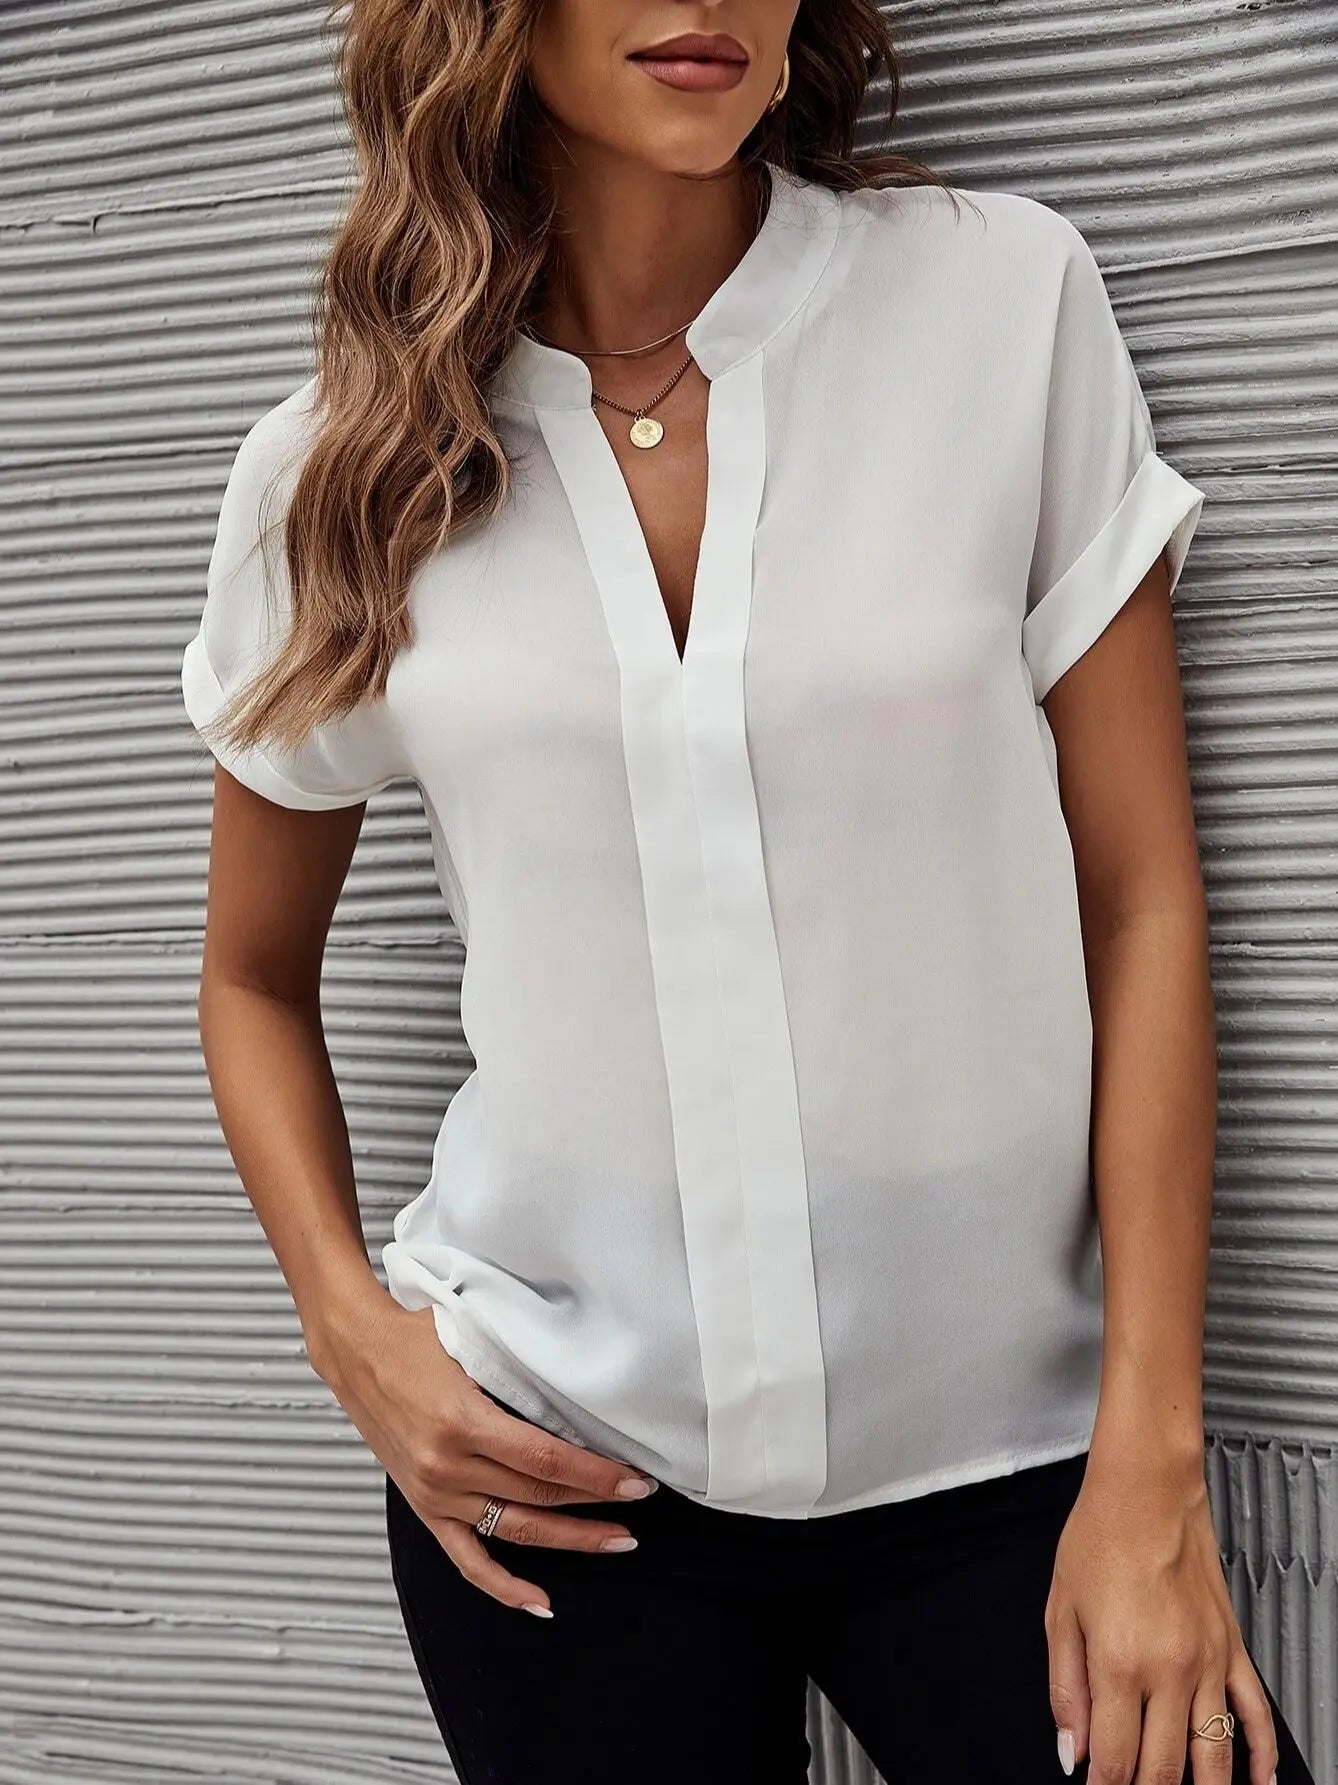 Solid White Batwing Sleeve Women's Unity Shirt